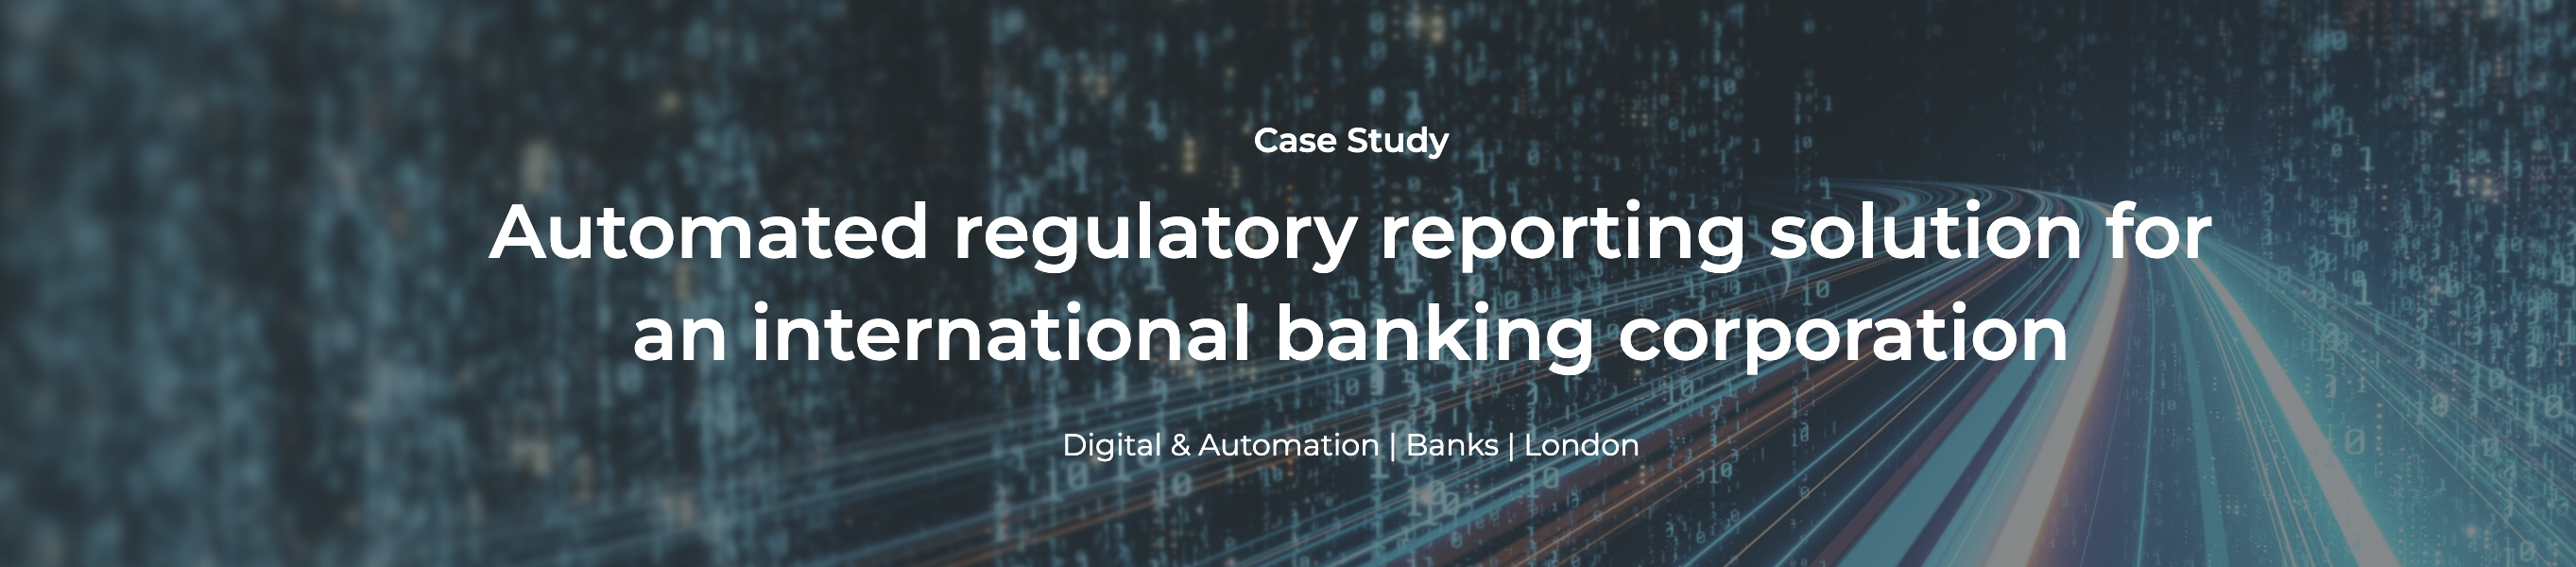 Digital Case Study: Automated regulatory reporting solution for a bank